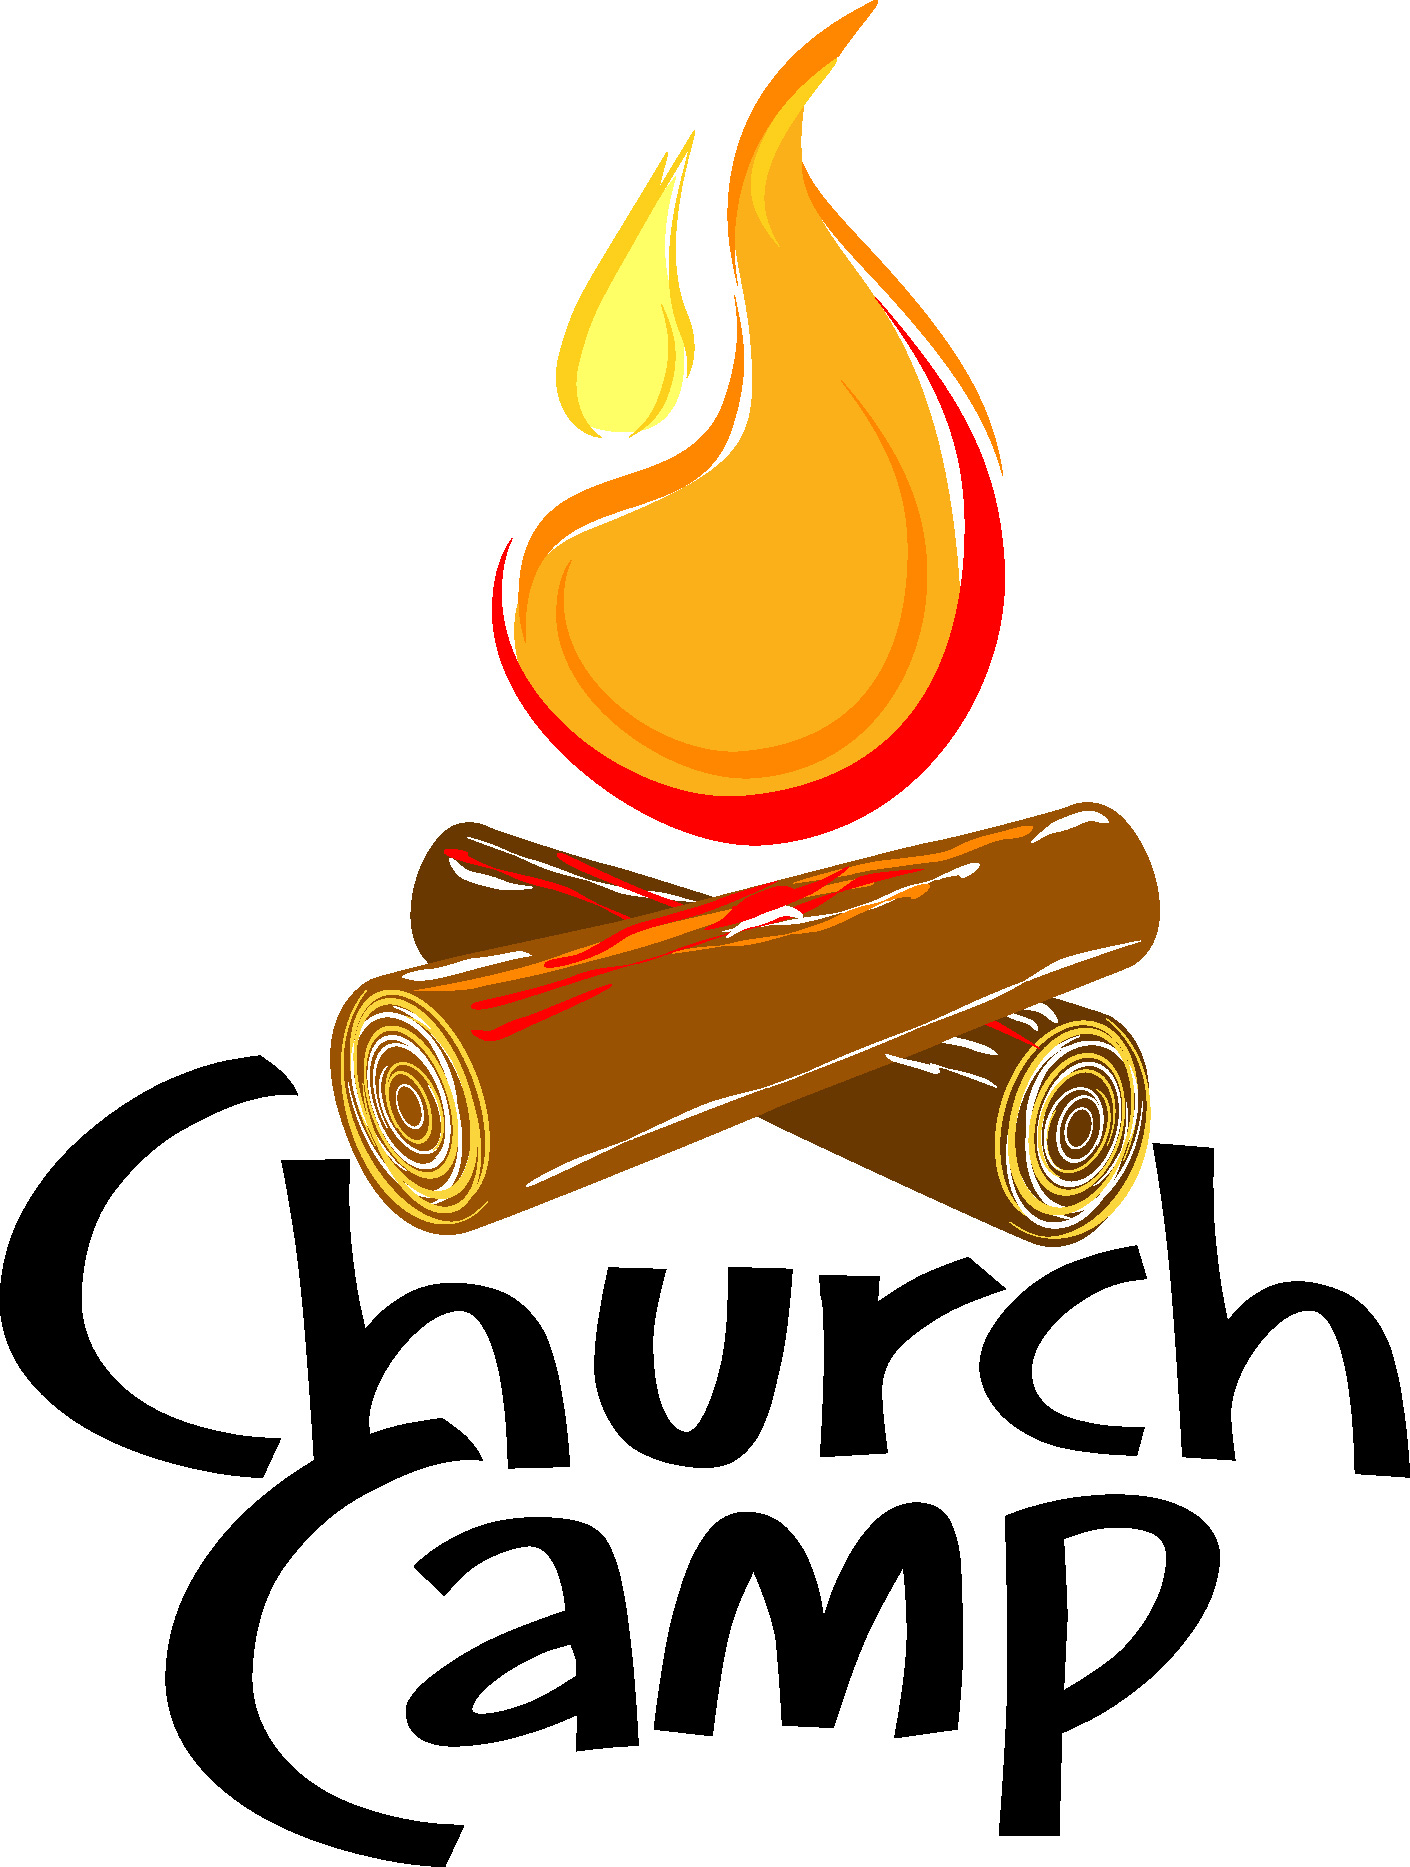 clearview church camp